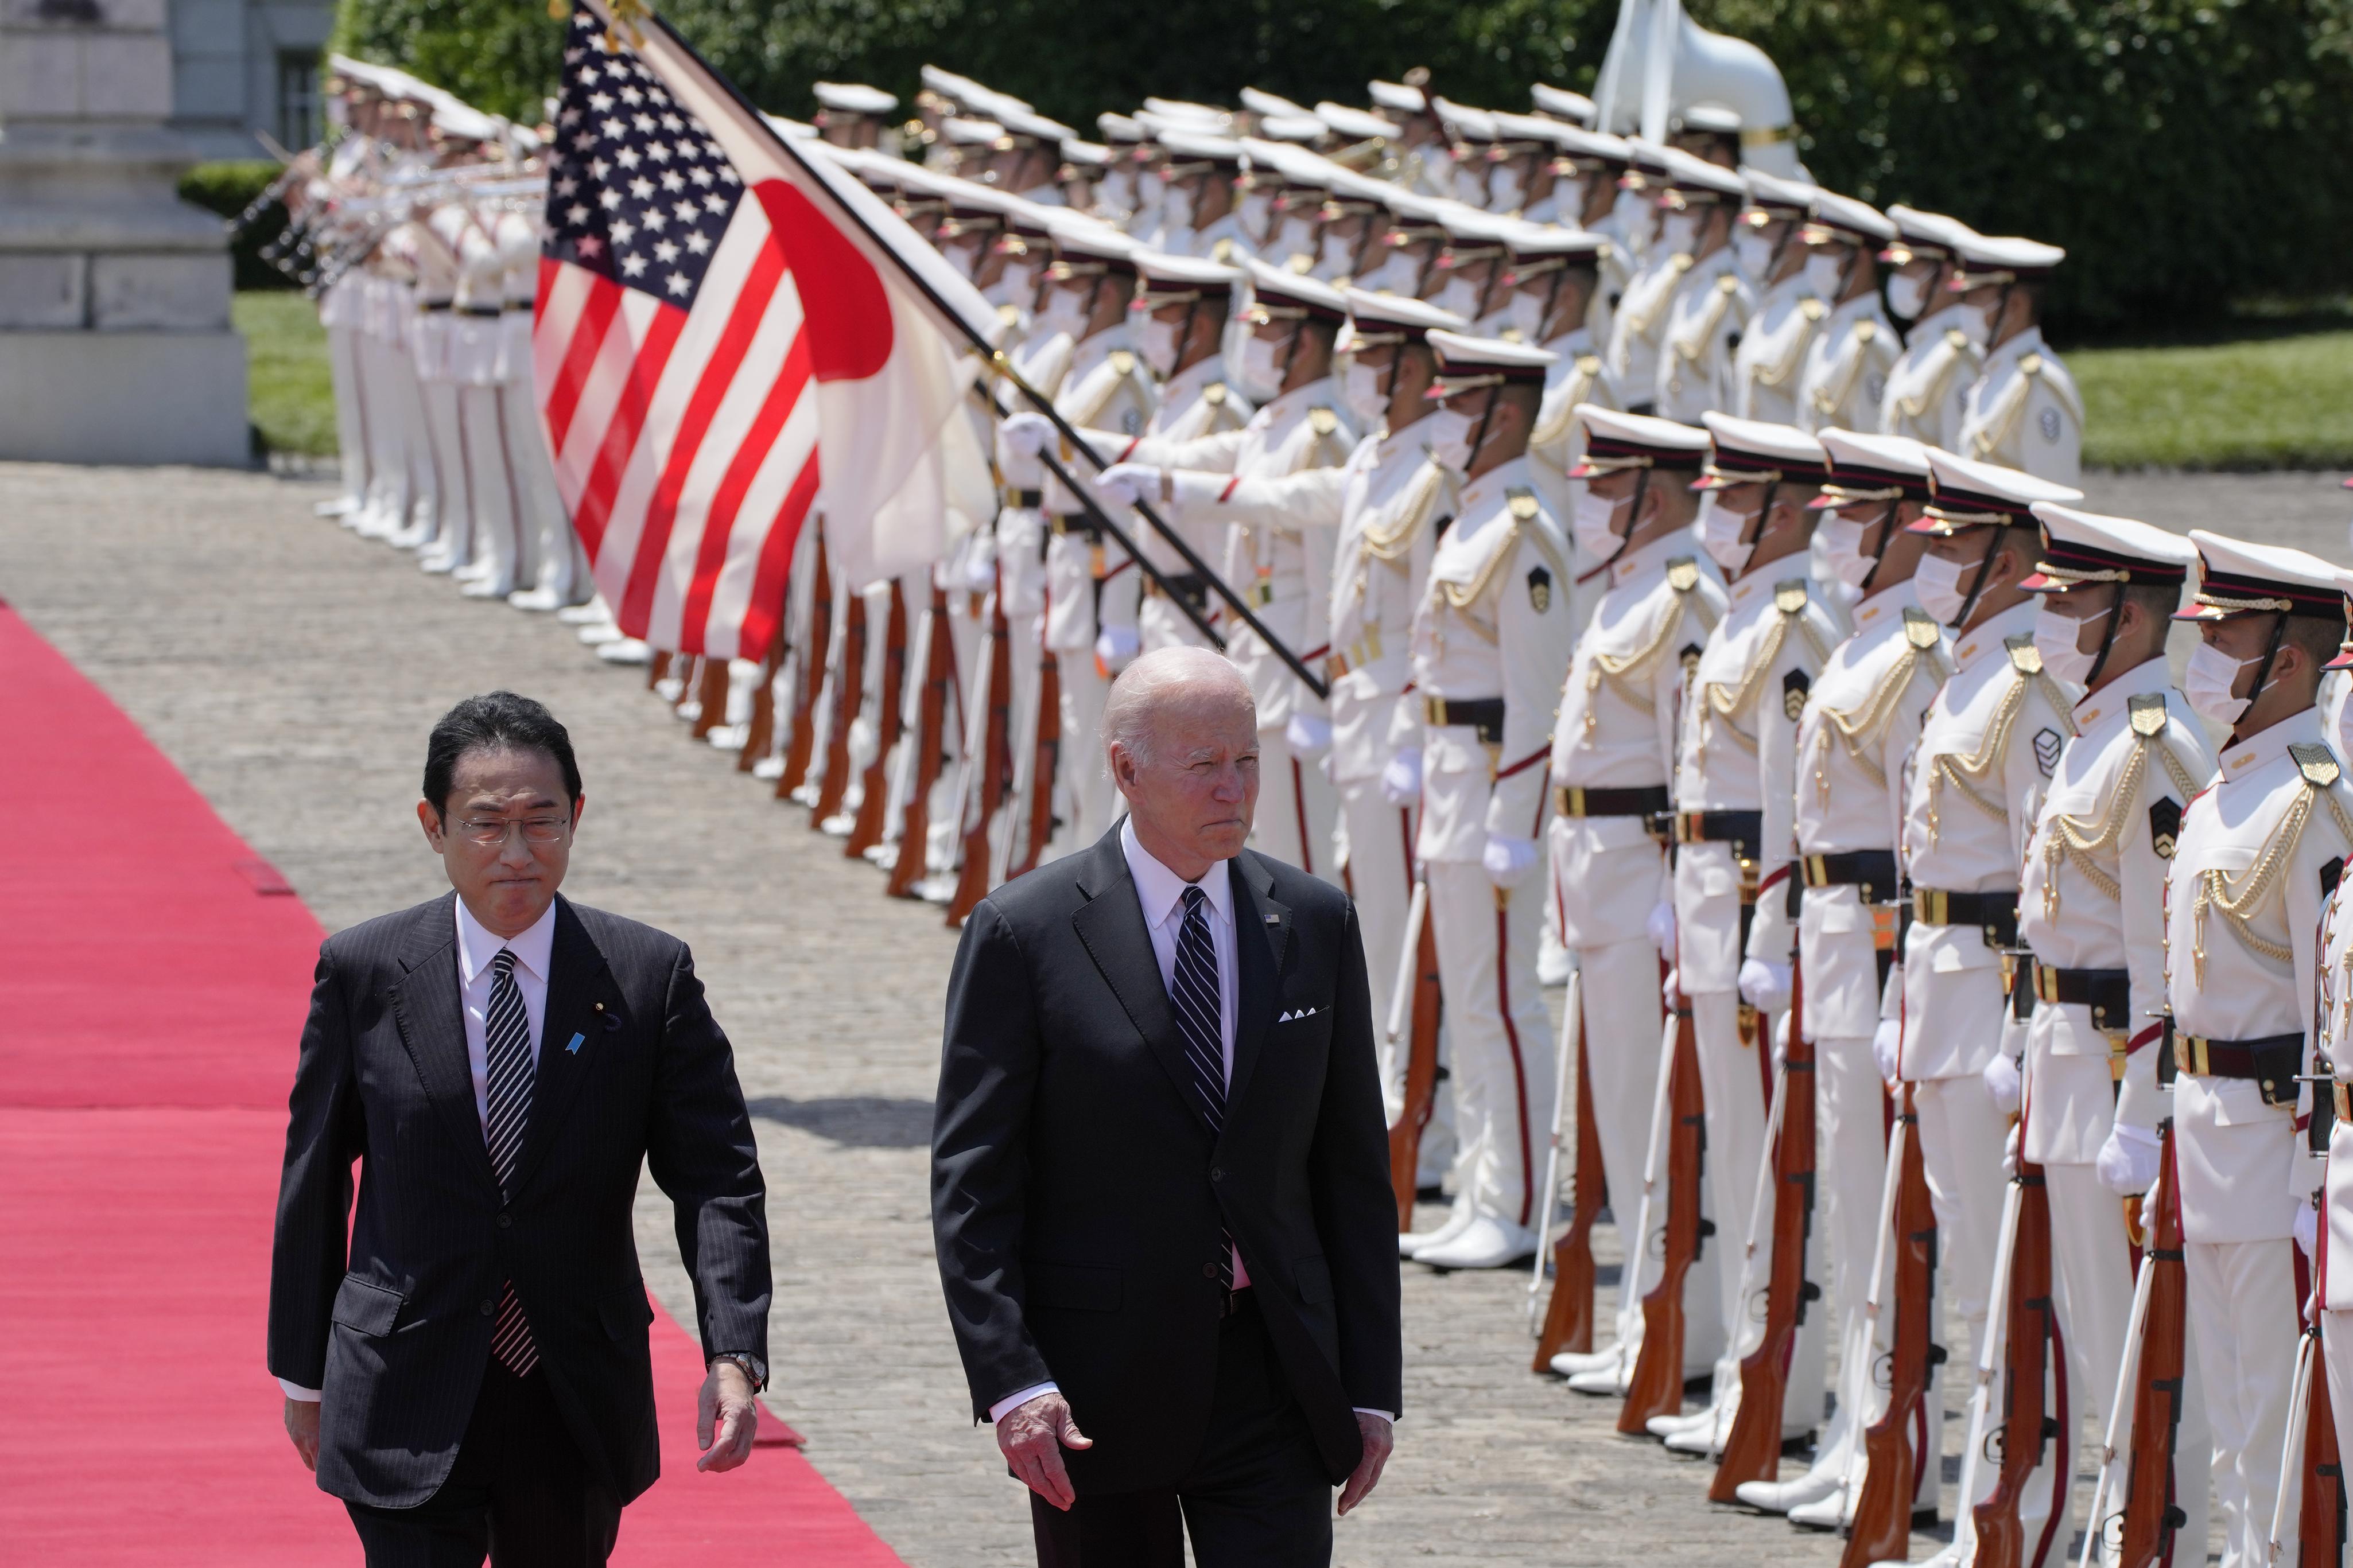 Kishida and Biden walk down a red carpet in front of members of the Japanese military in white uniforms.